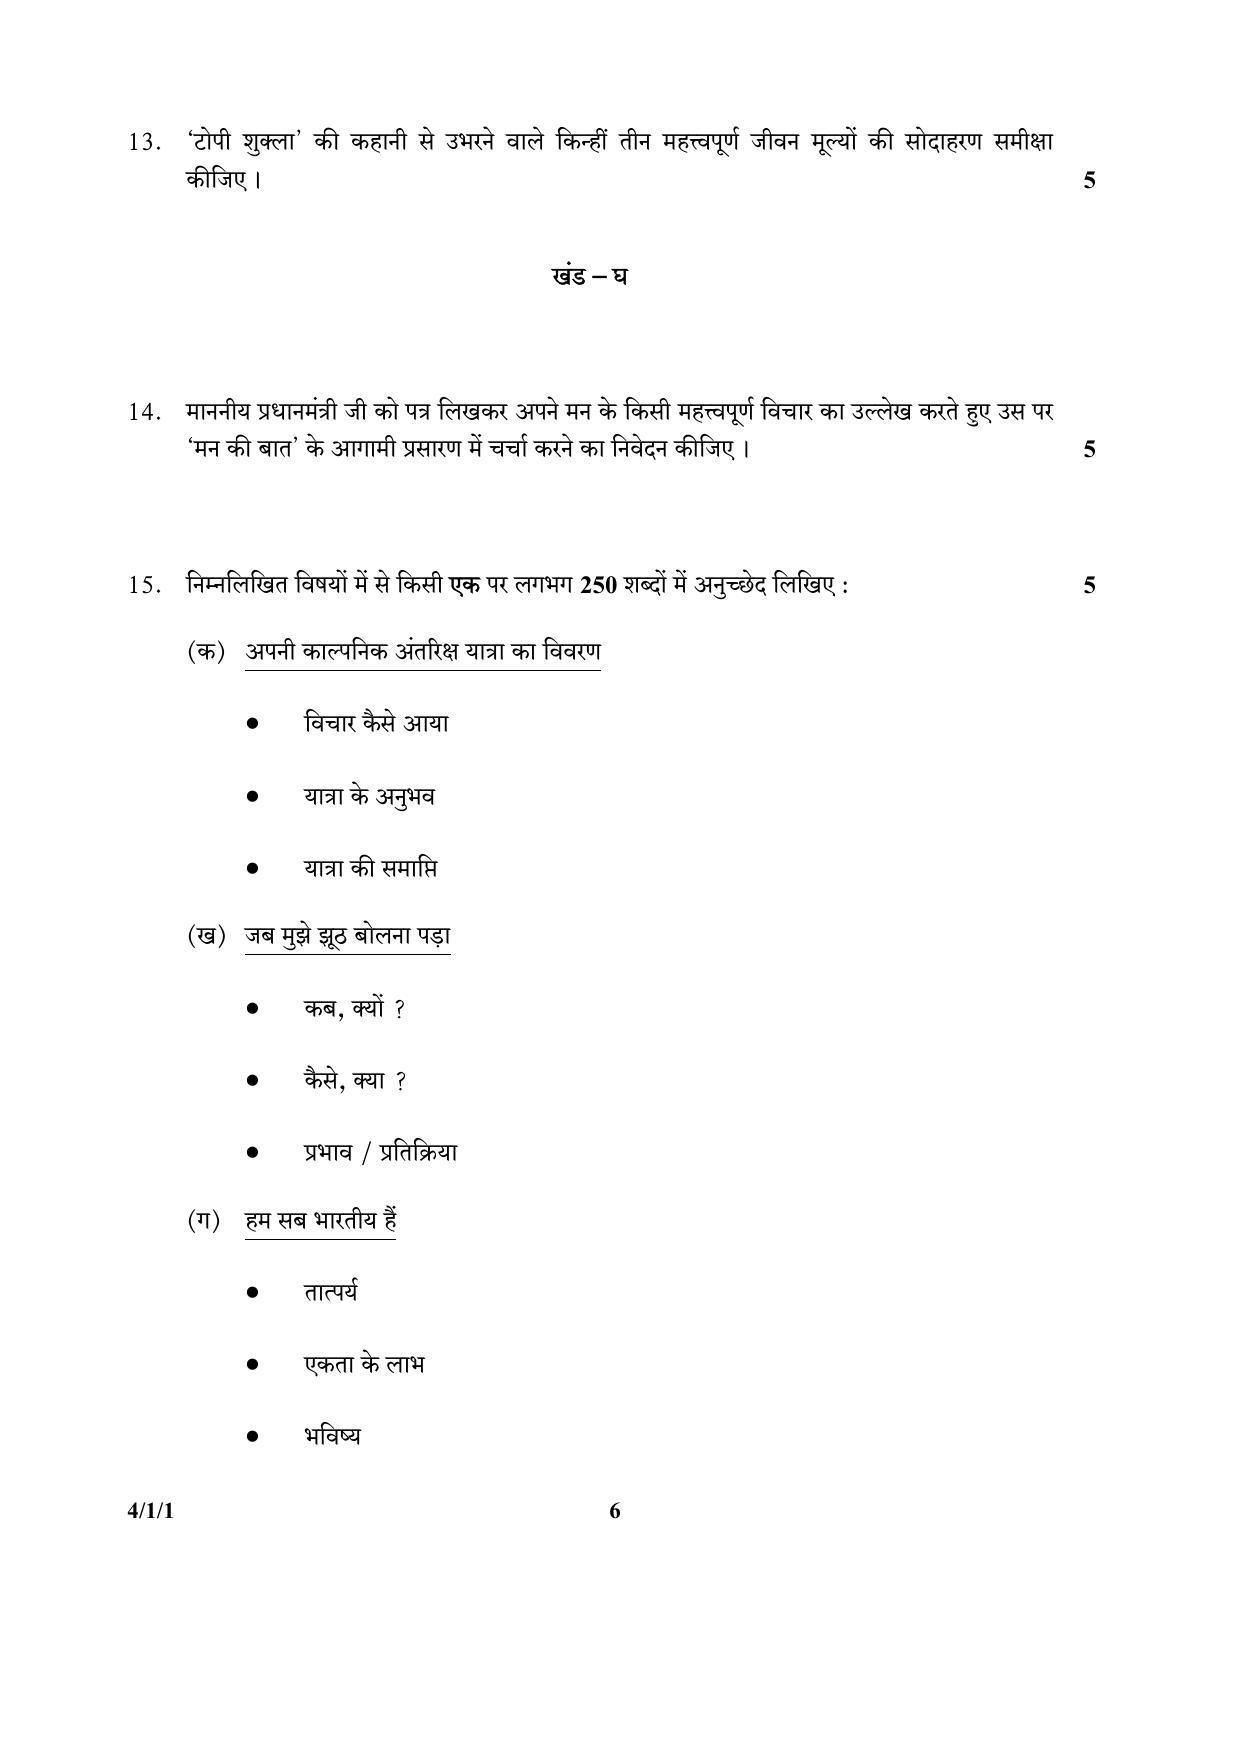 CBSE Class 10 4-1-1_Hindi 2017-comptt Question Paper - Page 6